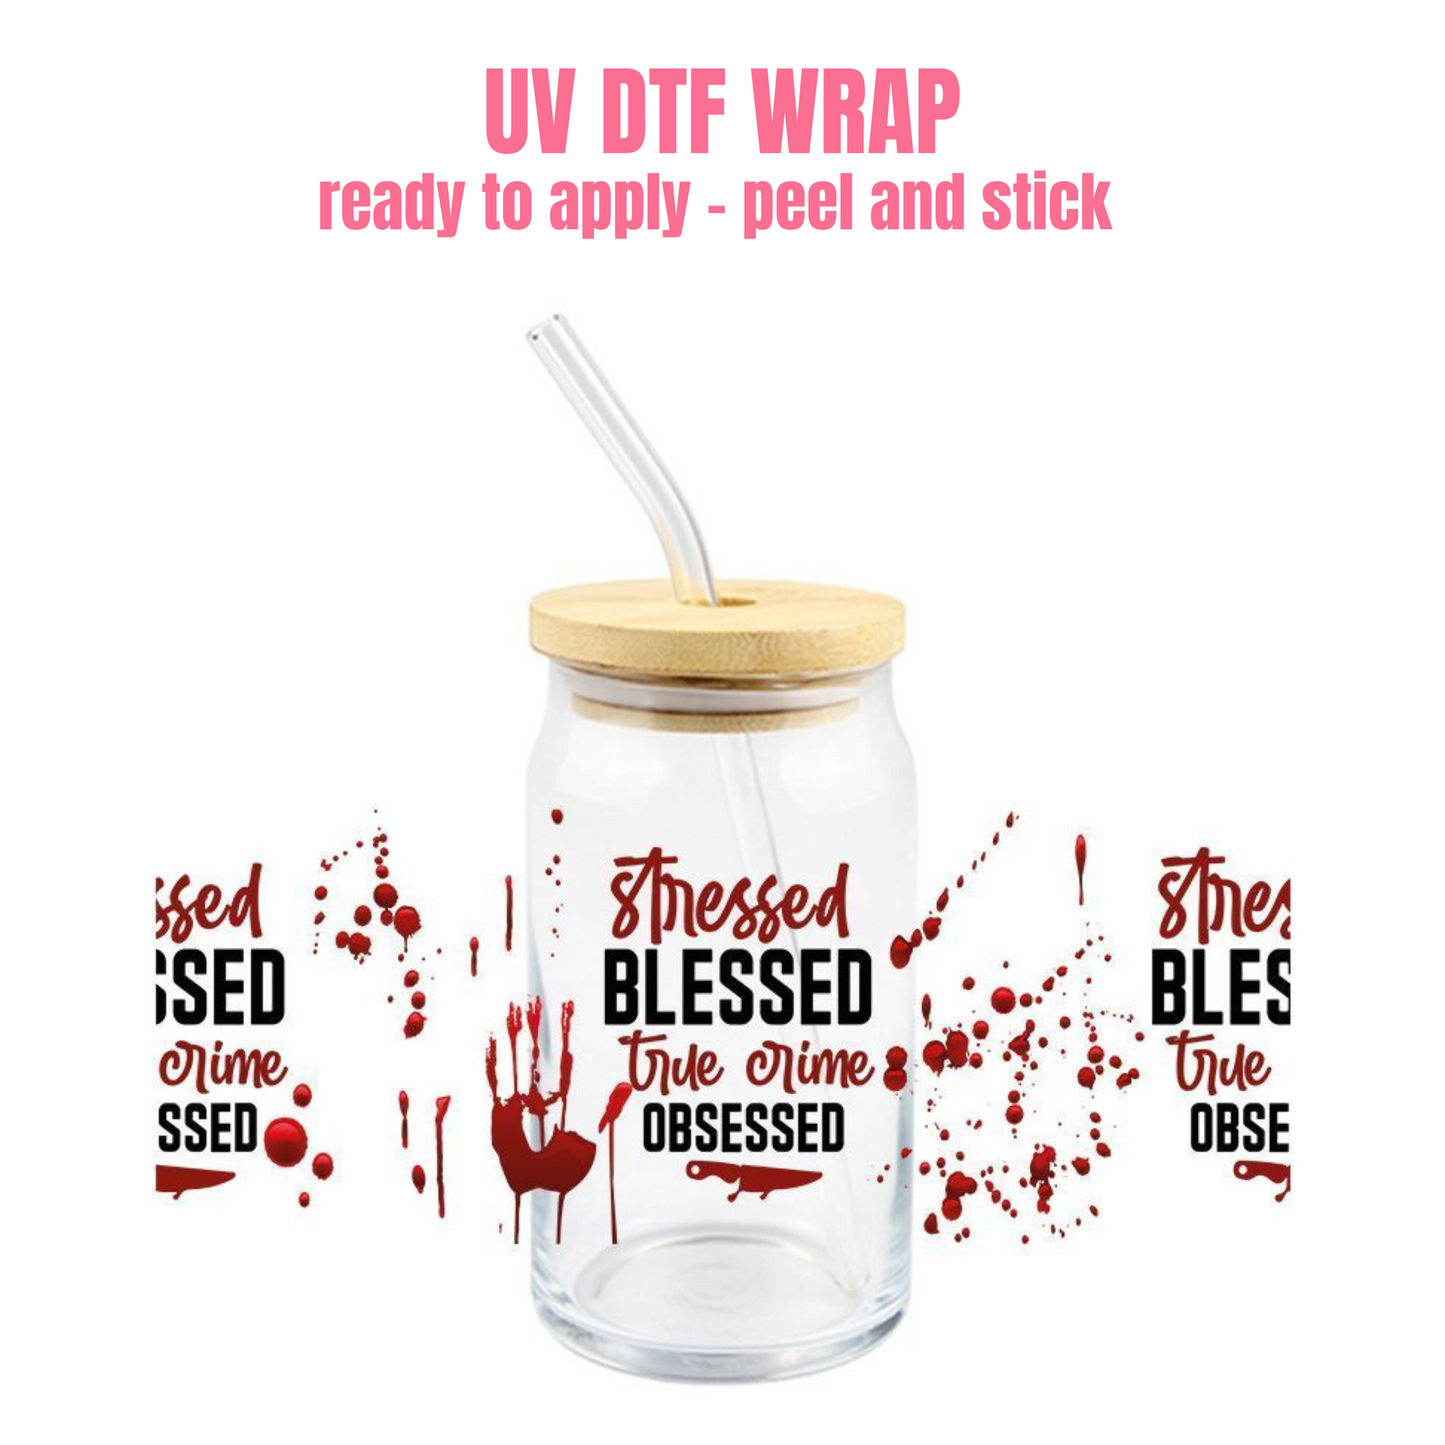 UV DTF CUP WRAP True Crime Obsessed H20